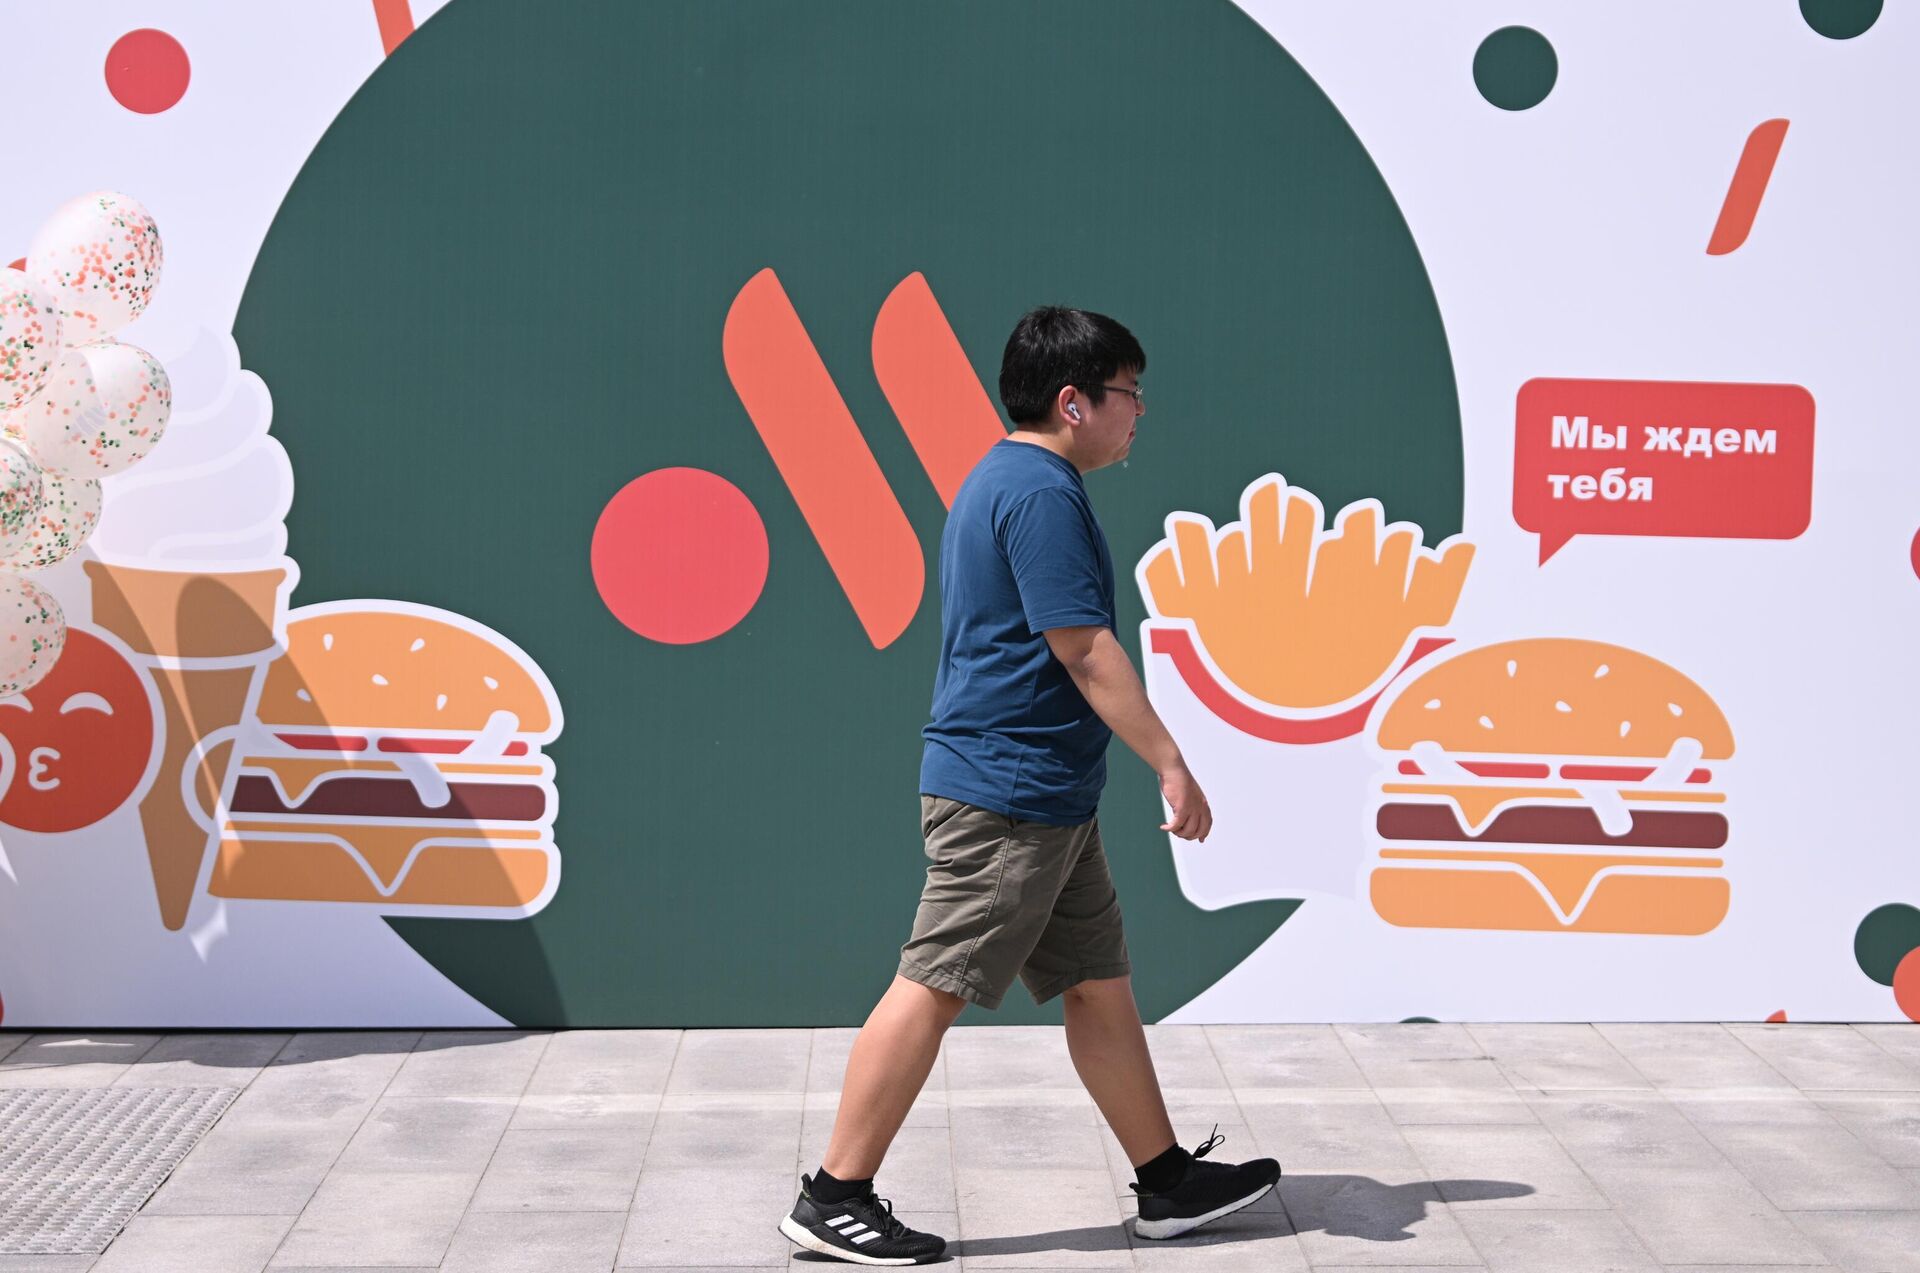 A boy walks past an ad board of a new fast-food chain on Malaya Bronnaya street, in Moscow, Russia. The new chain of restaurants based on McDonald's is going to be called Vkusno i tochka (Delicious and that's it!) - Sputnik International, 1920, 12.06.2022